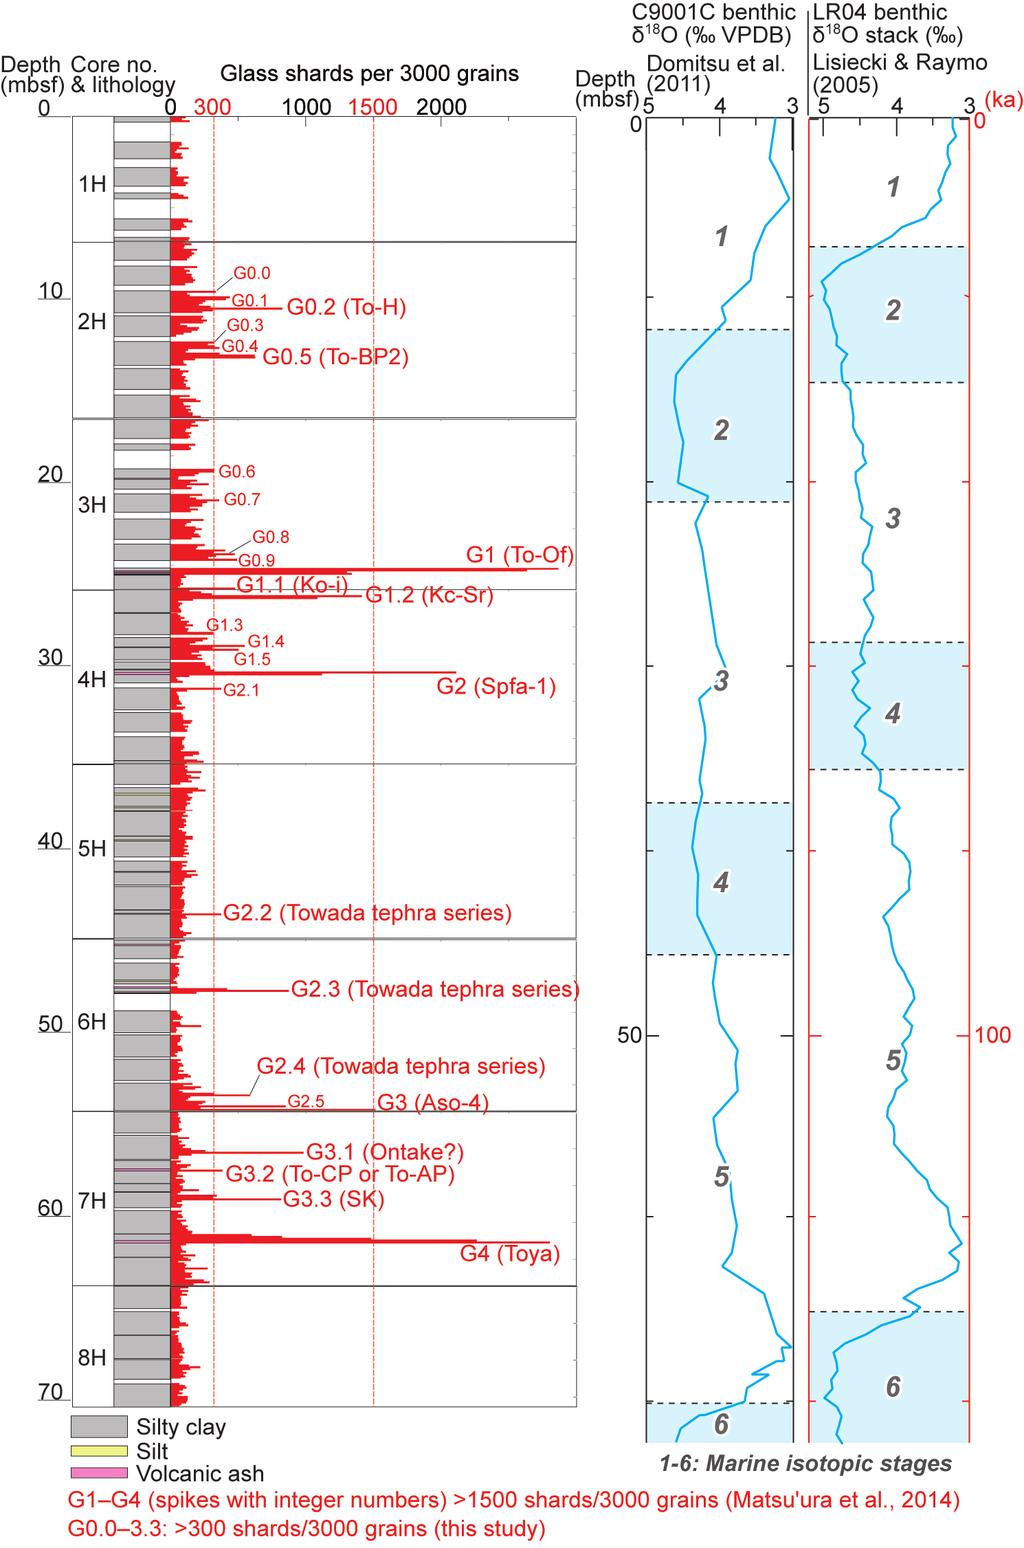 T. Matsu ura and J. Komatsubara Fig. 2. Stratigraphy, tephra grain components, and oxygen isotopic record of benthic foraminifera in the C9001C cores.